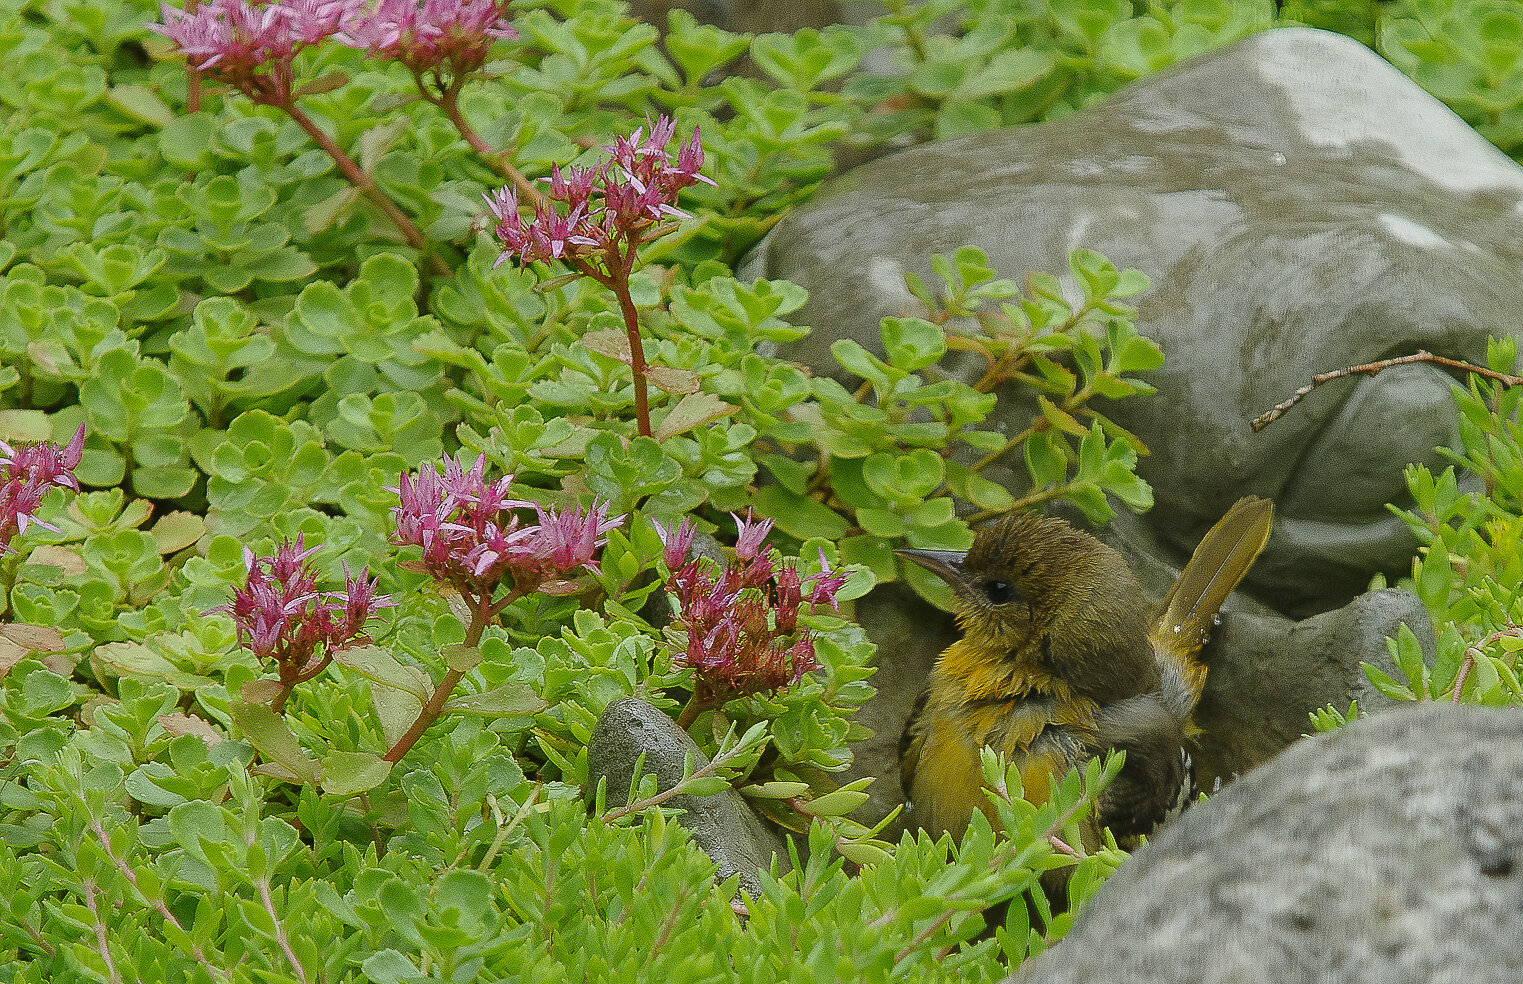 A young Baltimore Oriole takes a bath in one of our on-ground water sources.